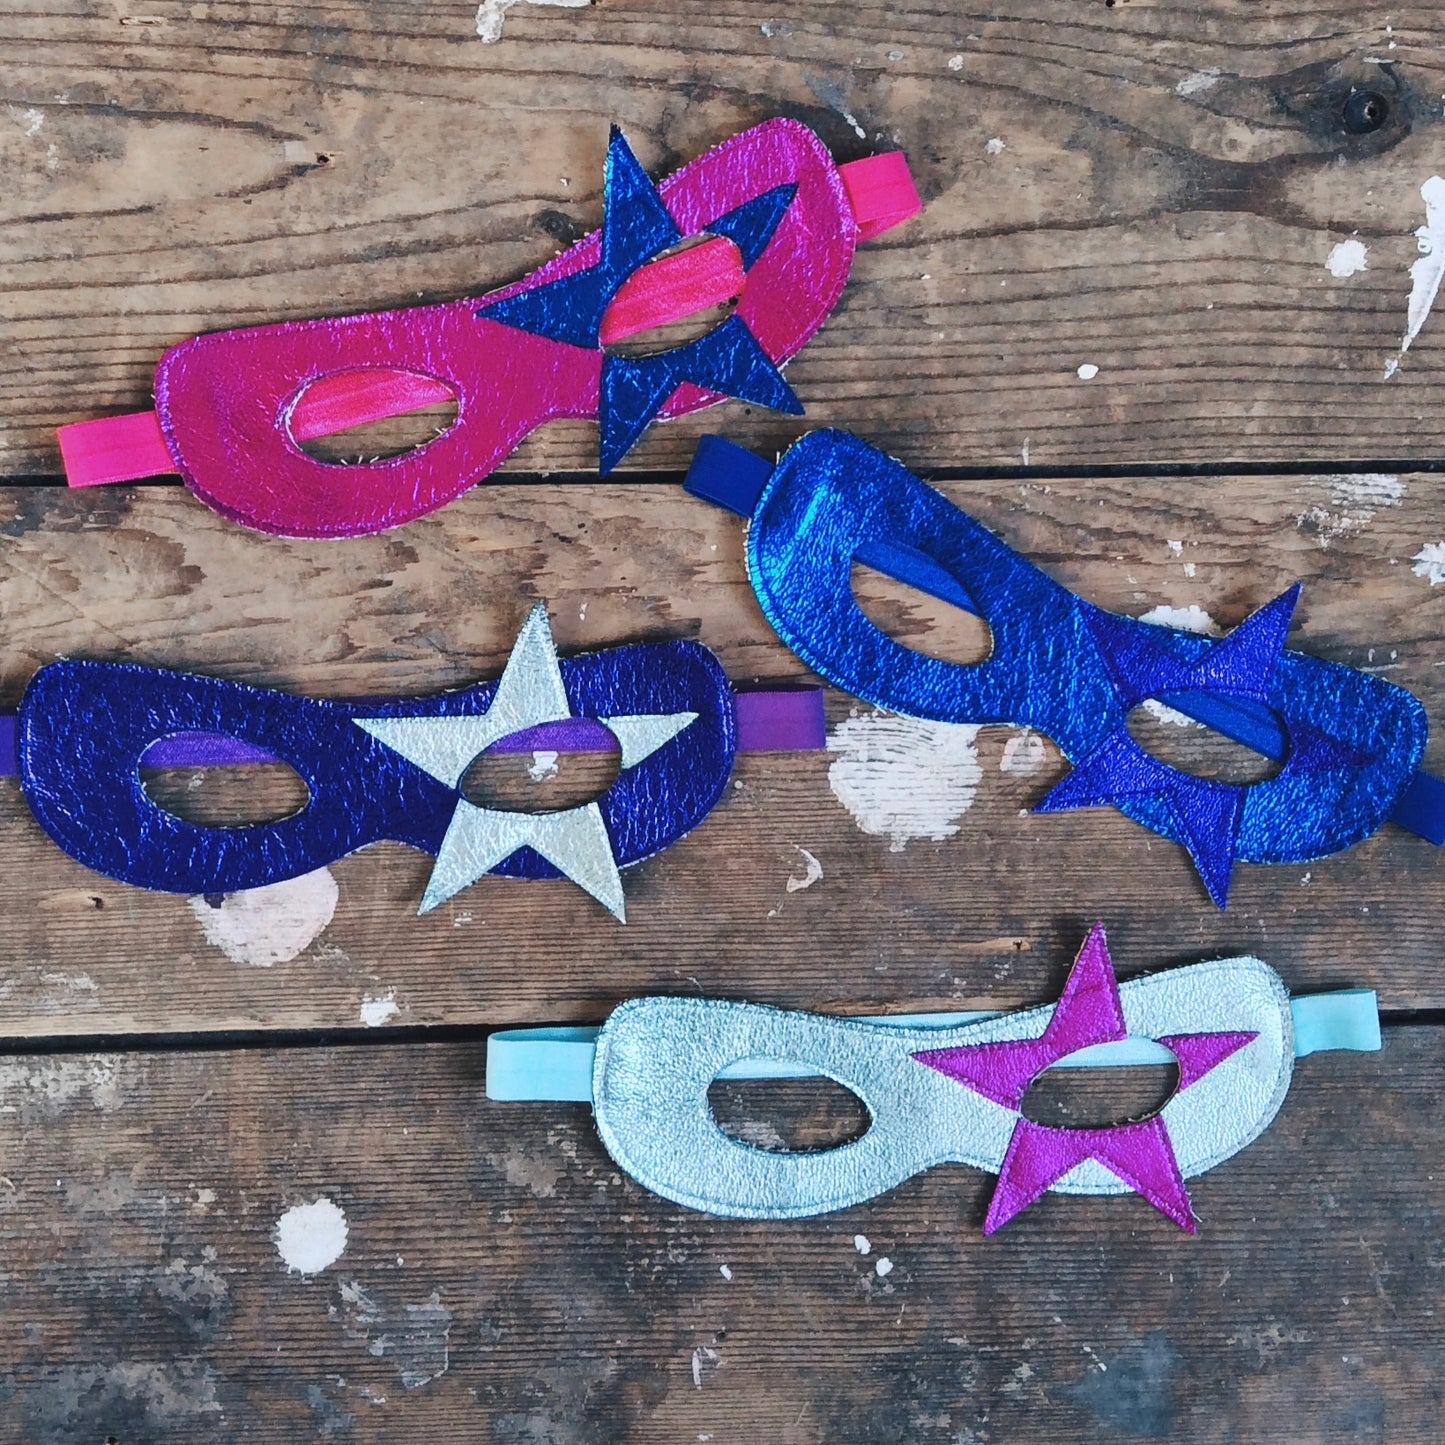 Colour variations of Metallic leather Star superhero mask by For Just ONE Day